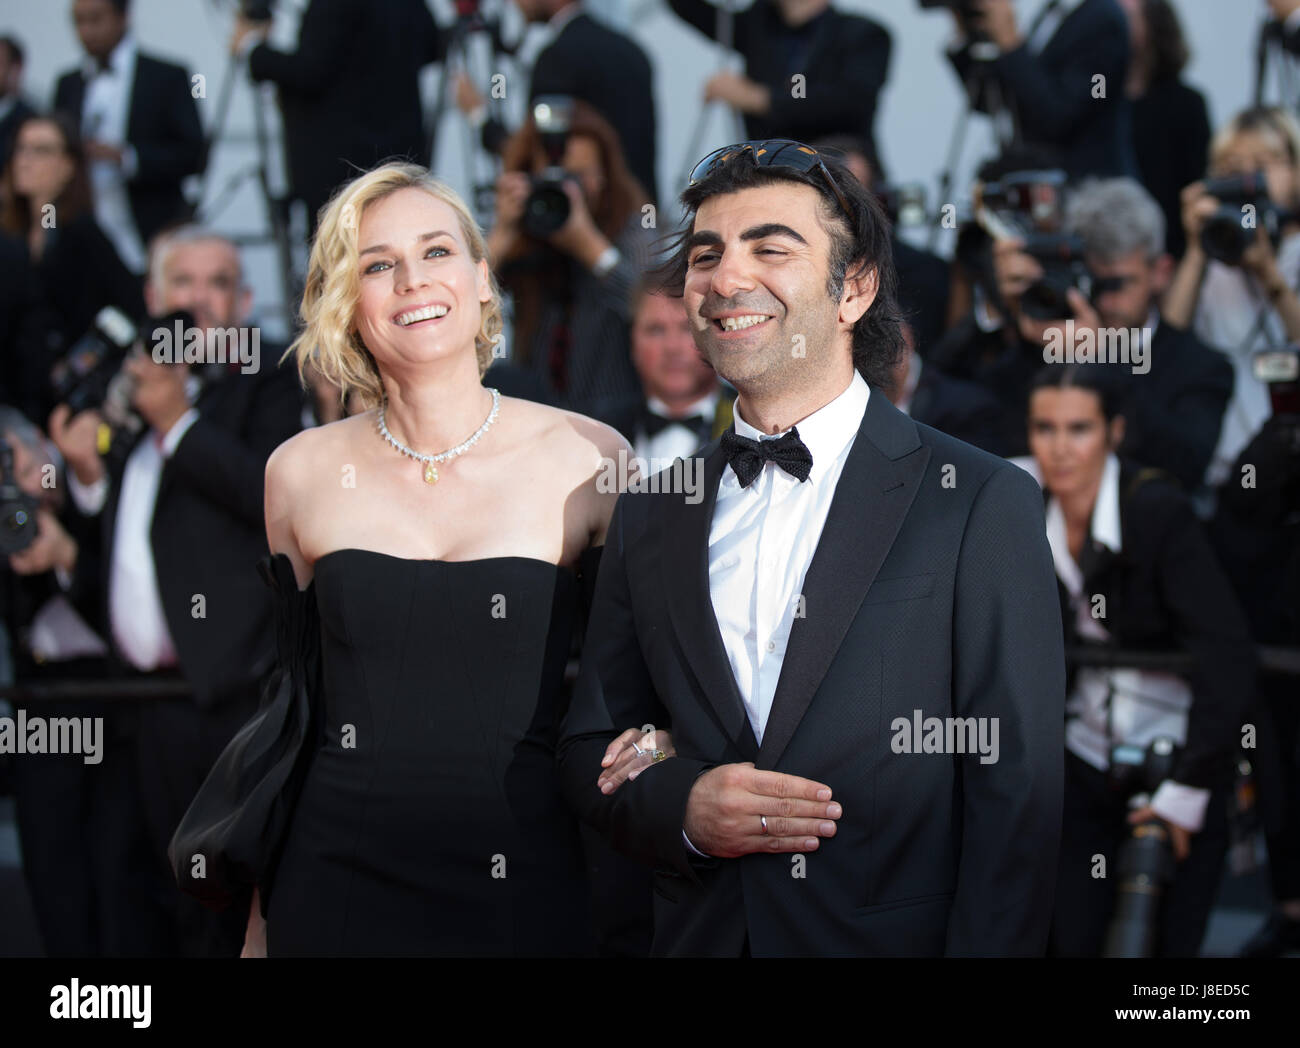 Cannes, France. 28th May, 2017. Actress Diane Kruger, winner of the Best Actress Award for the film 'In The Fade', poses with director Fatih Akin on the red carpet of the closing ceremony of the 70th Cannes Film Festival in Cannes, France, May 28, 2017. Credit: Xu Jinquan/Xinhua/Alamy Live News Stock Photo